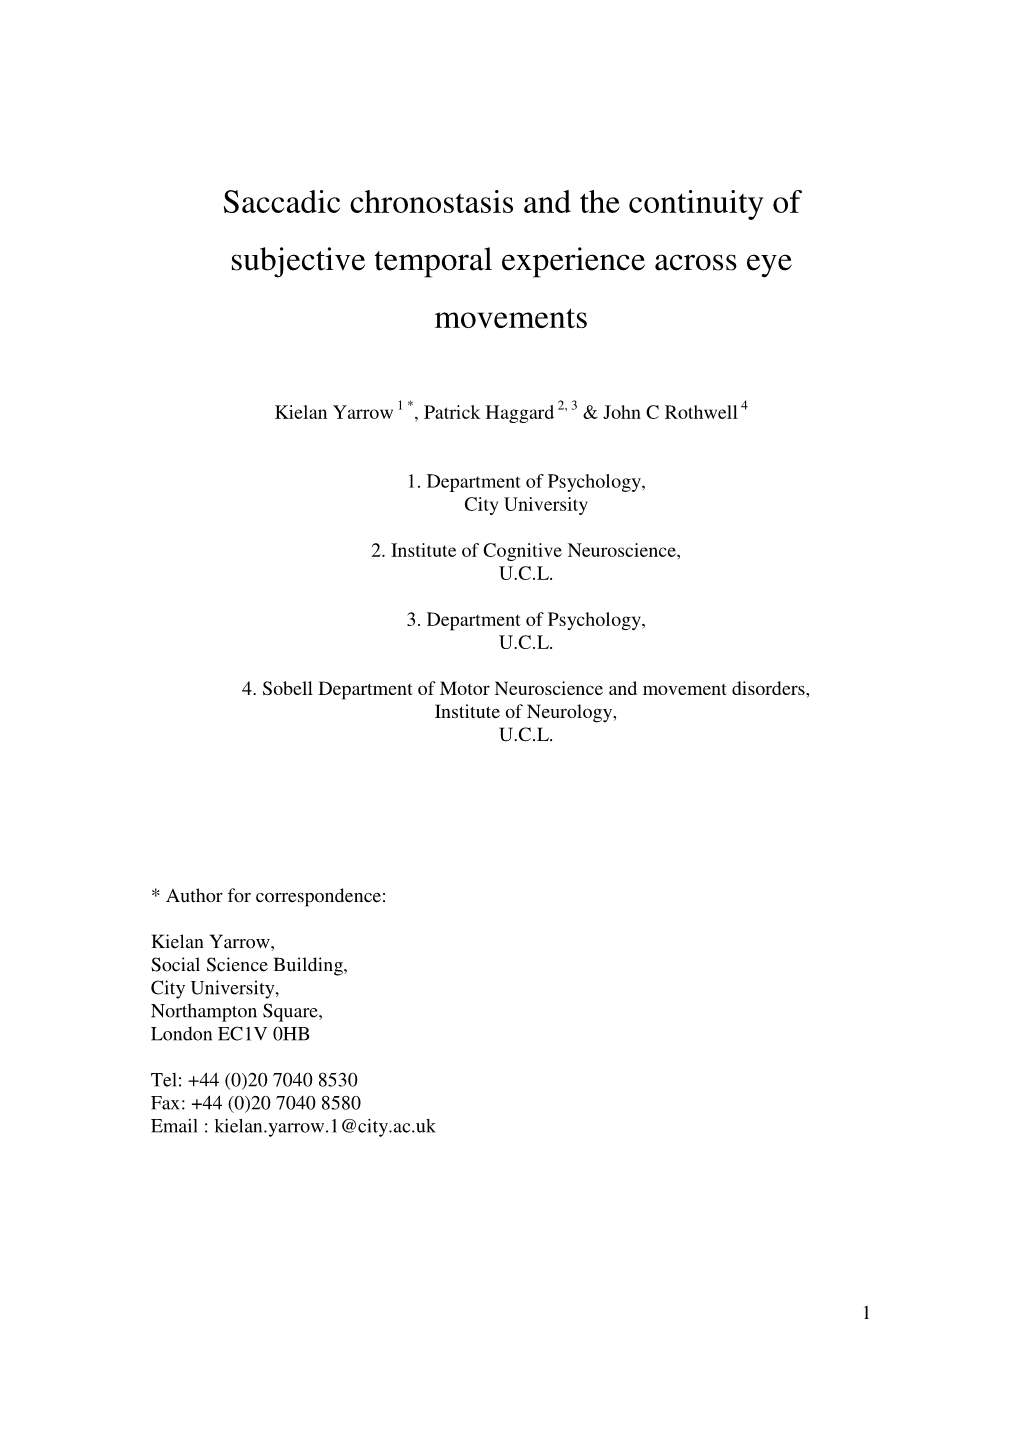 Saccadic Chronostasis and the Continuity of Subjective Temporal Experience Across Eye Movements